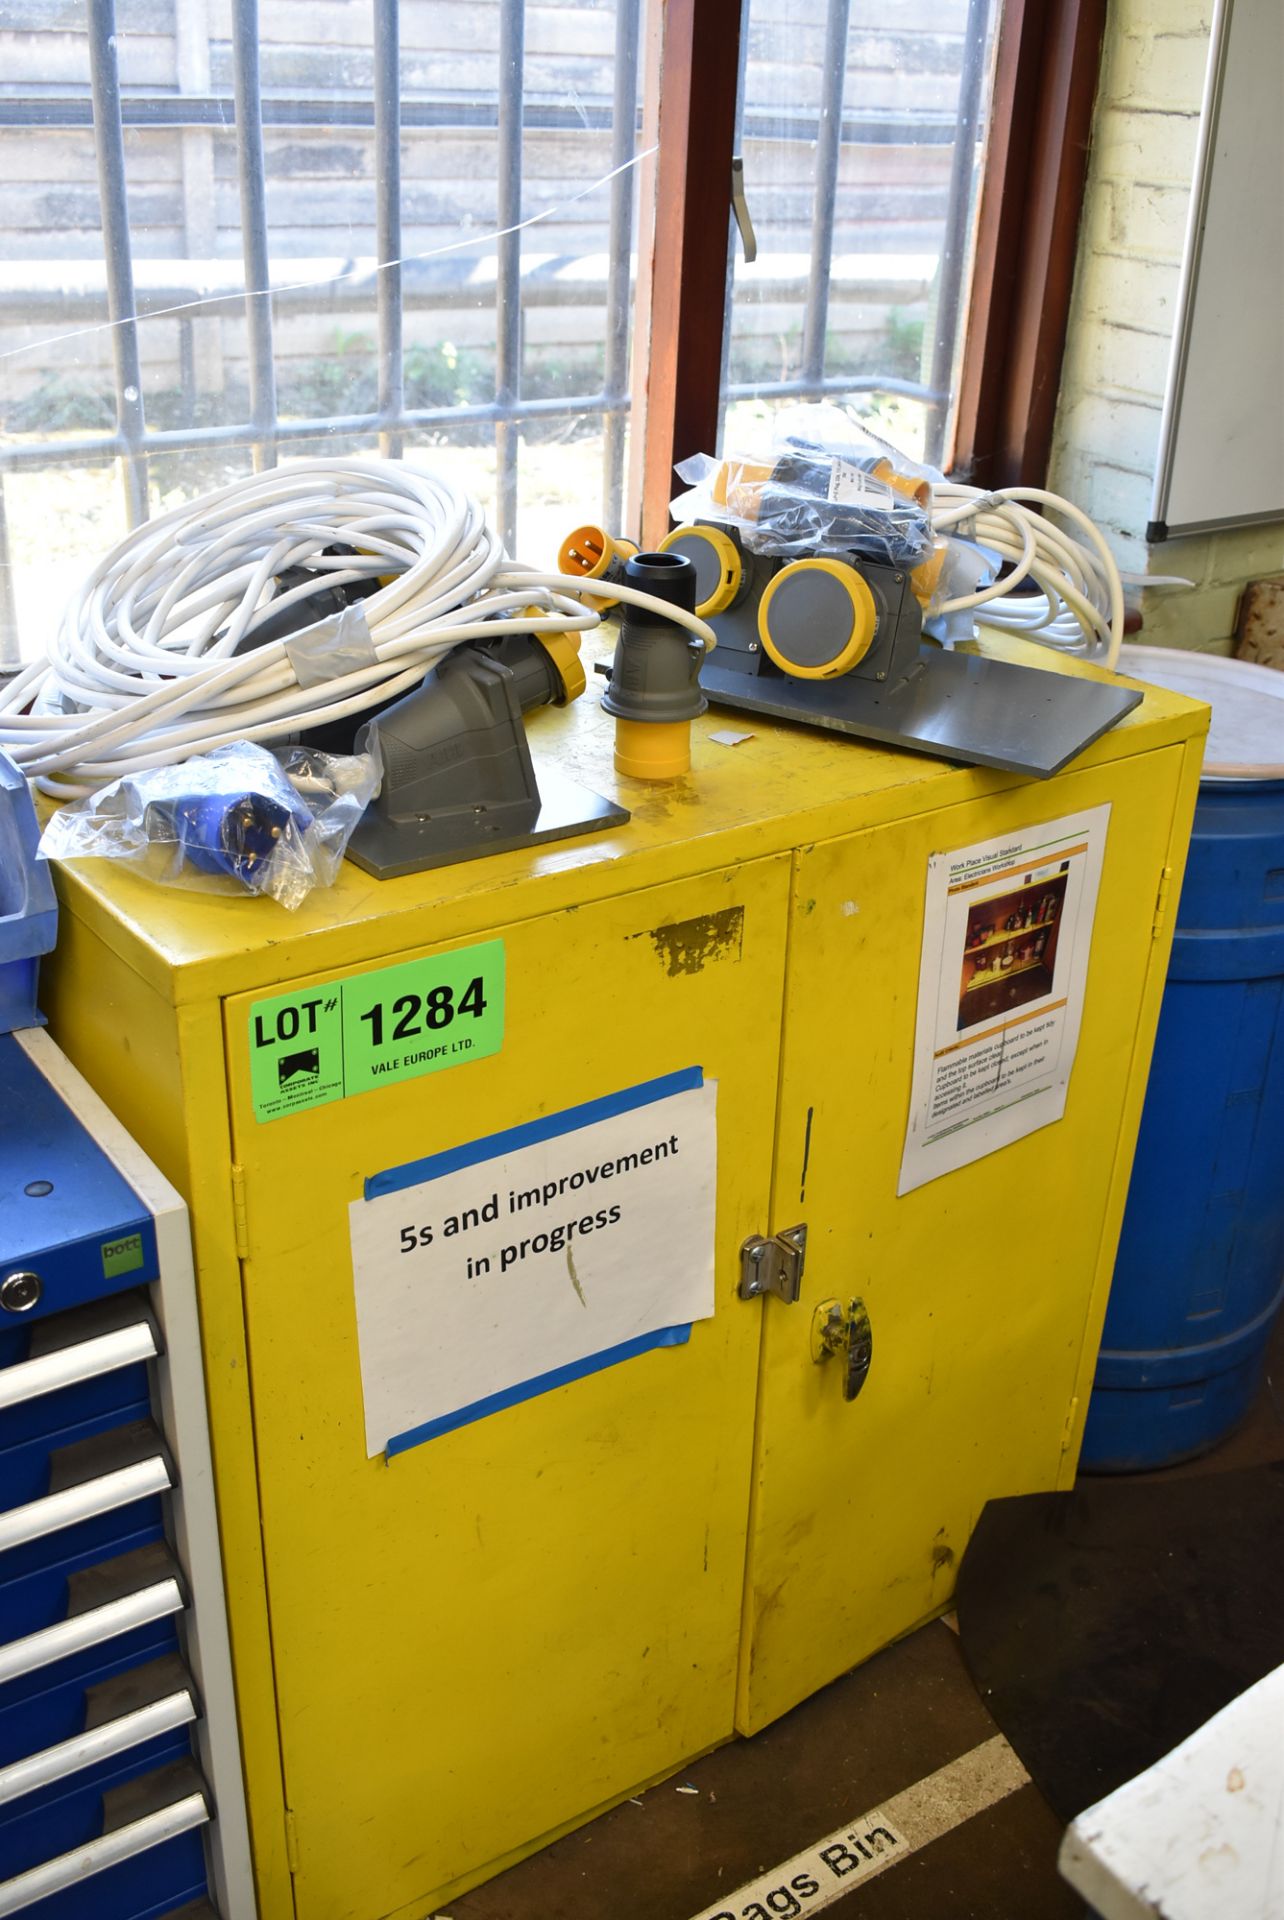 2 DOOR FIREPROOF CABINET (ELECTRICAL SHOP) [RIGGING FEES FOR LOT #1284 - £100 PLUS APPLICABLE